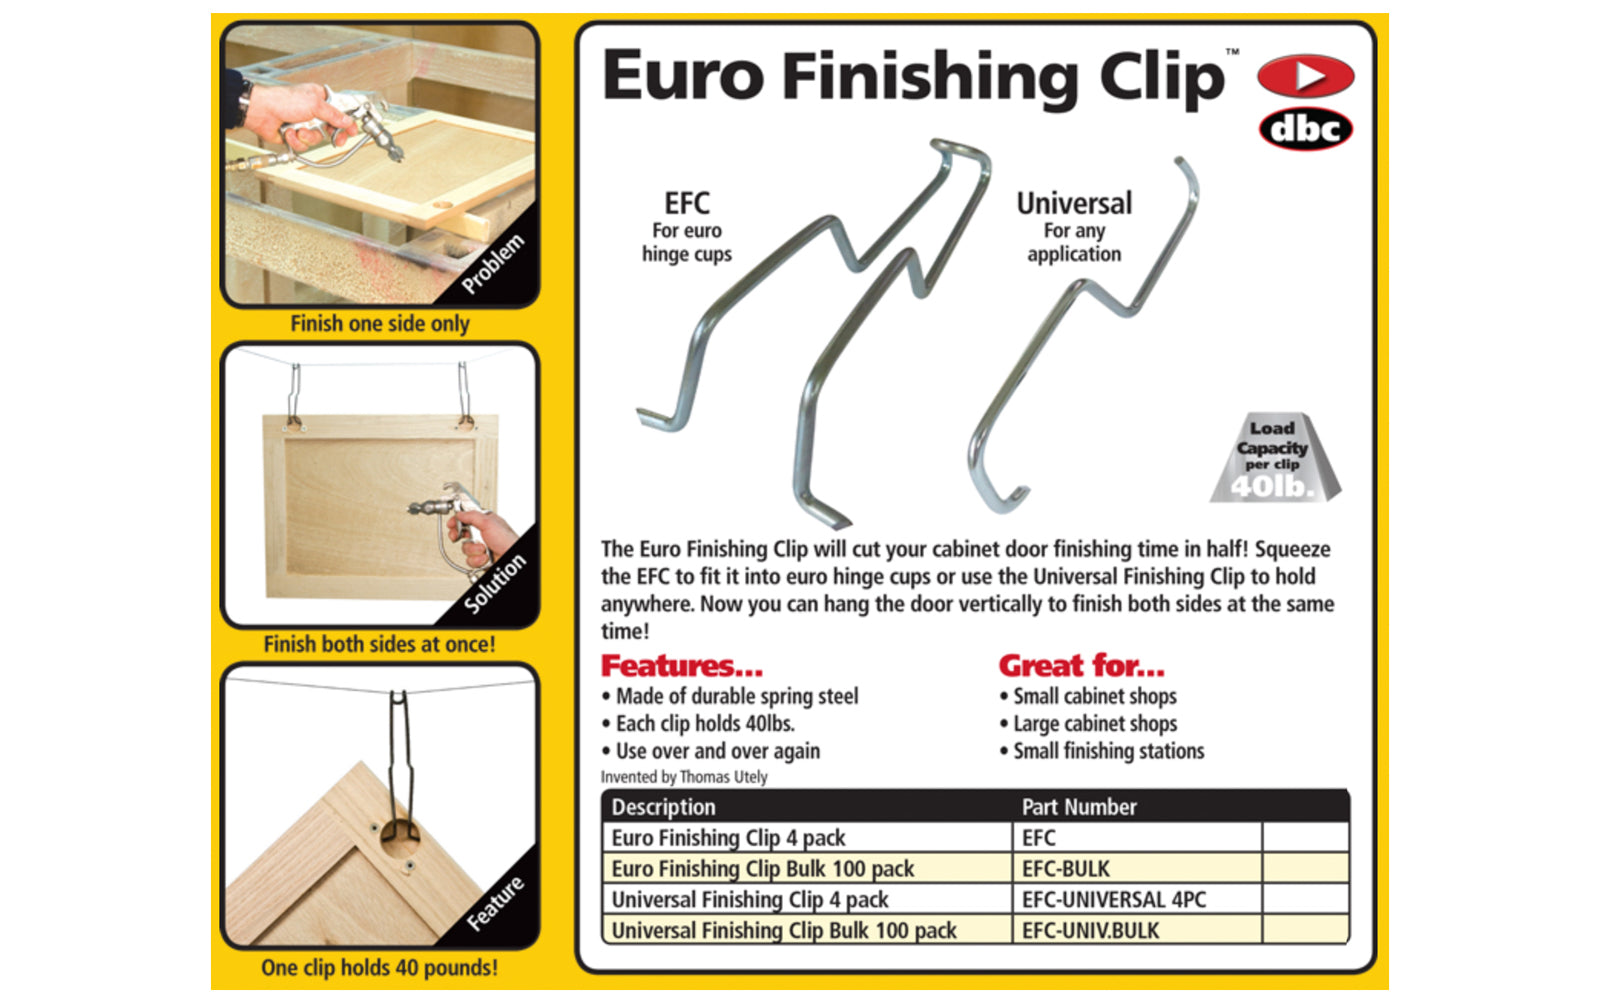 FastCap Universal Cabinet Door Finishing Clips - 4 Pack ~ Cuts your cabinet door finishing time in half - Made of durable spring steel - Designed for universal cabinet doors